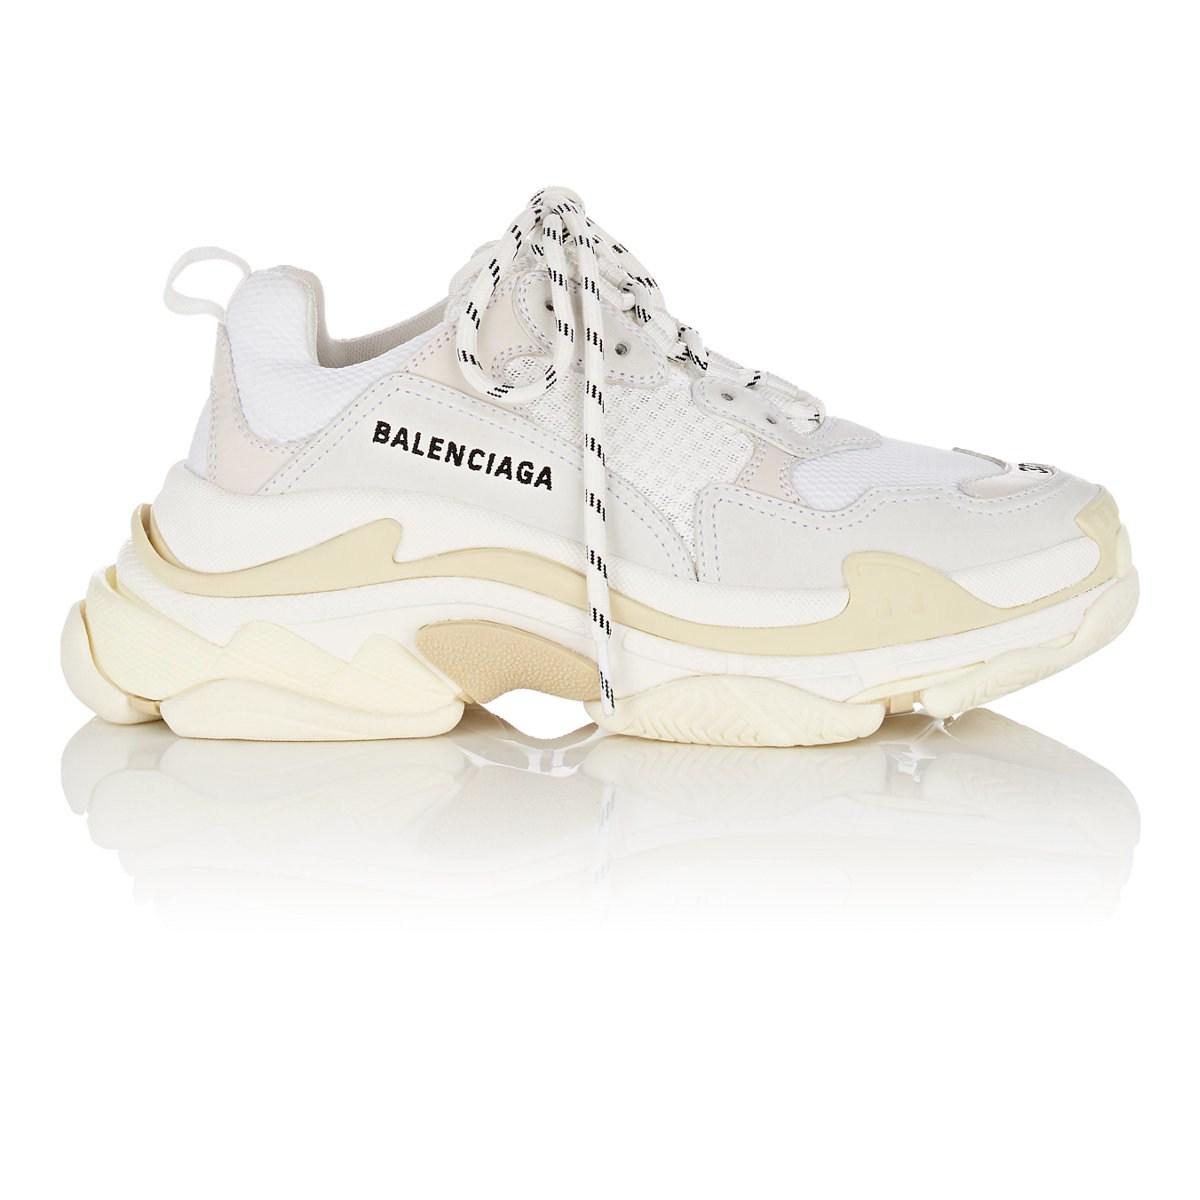 Balenciaga Leather Triple S Sneakers in White - Save 15% - Lyst